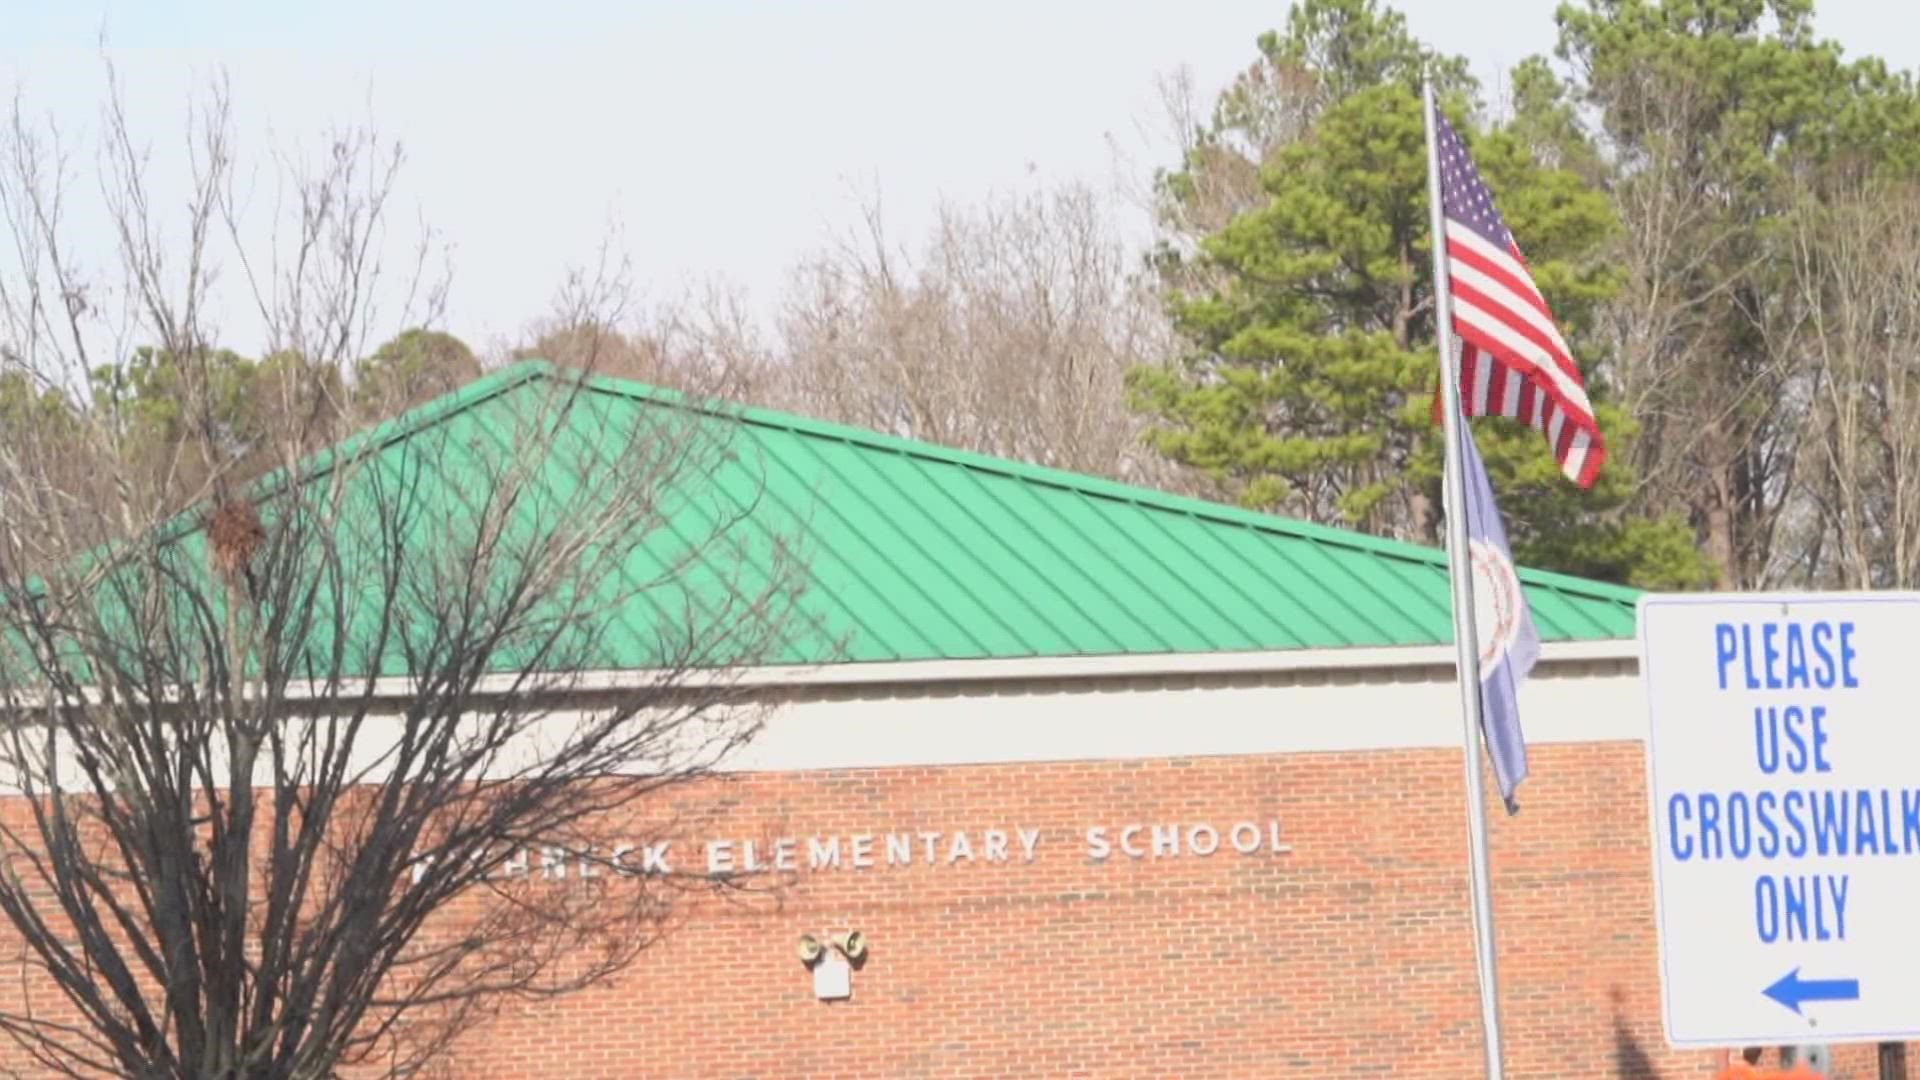 Parents returned to Richneck Elementary School to pick up their children's belongings they left behind amid the shooting scare and school lockdown.